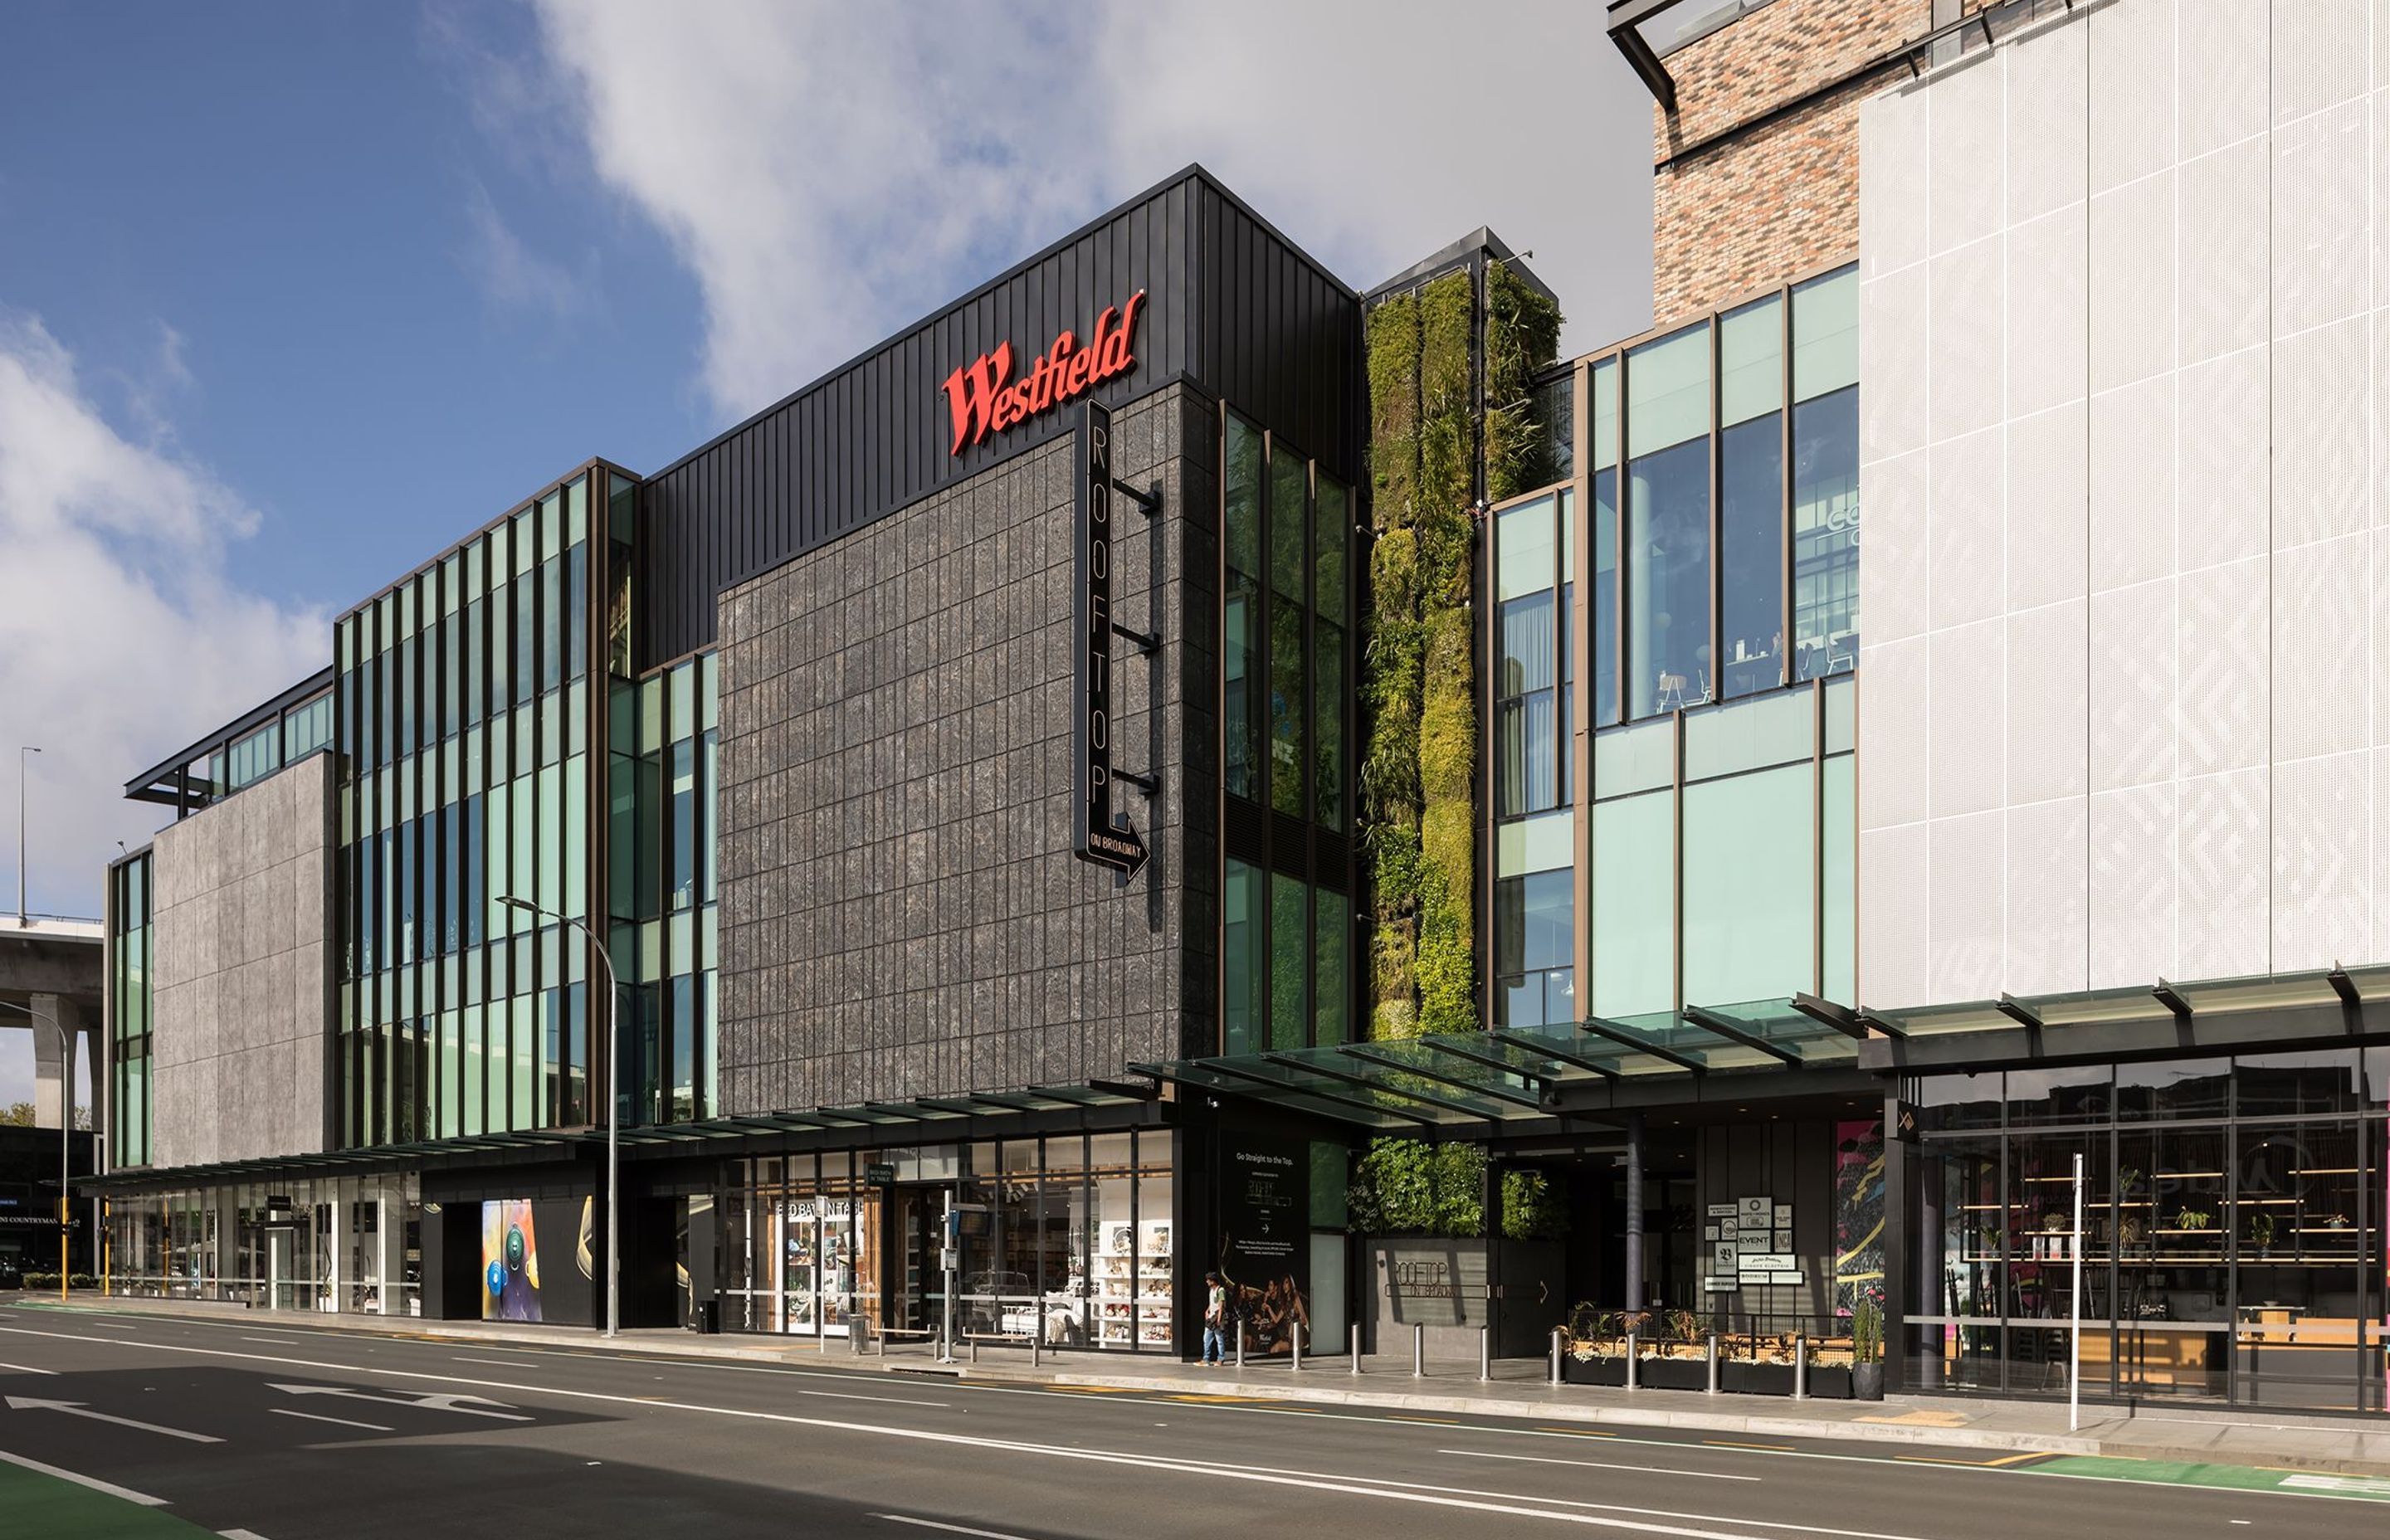 The Scentre Group commissioned Natural Habitats to install the largest total area of green walls—across four sections in total—in Australasia on its Westfield Newmarket development.